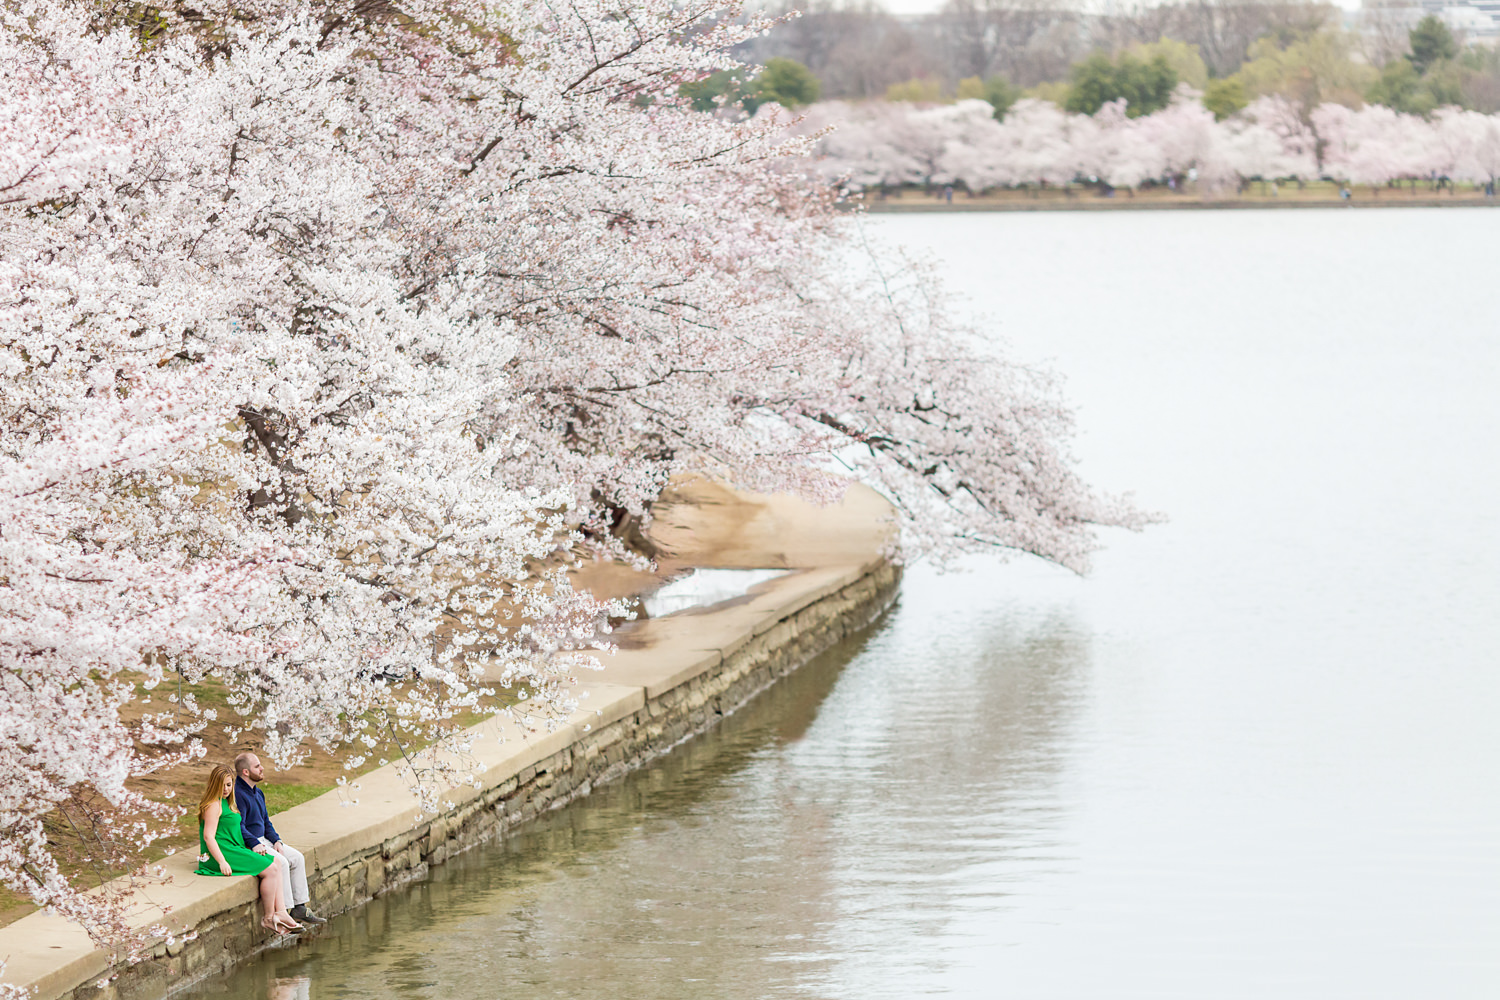 Cherry blossoms in DC, Cherry blossom festival, tidal basin, this is a landscape shot showing the a bird's eye view of the tidal basin, the couple is small in the frame sitting on the edge of the water, sunrise session, Procopio Photography, best top Washington DC photographer, best top Maryland photographer, best top Virginia photographer, best top DMV photographer, best top wedding photographer, best top commercial photographer, best top portrait photographer, best top boudoir photographer, modern fine art portraits, dramatic, unique, different, bold, editorial, photojournalism, award winning photographer, published photographer, memorable images, be different, stand out, engagement photography